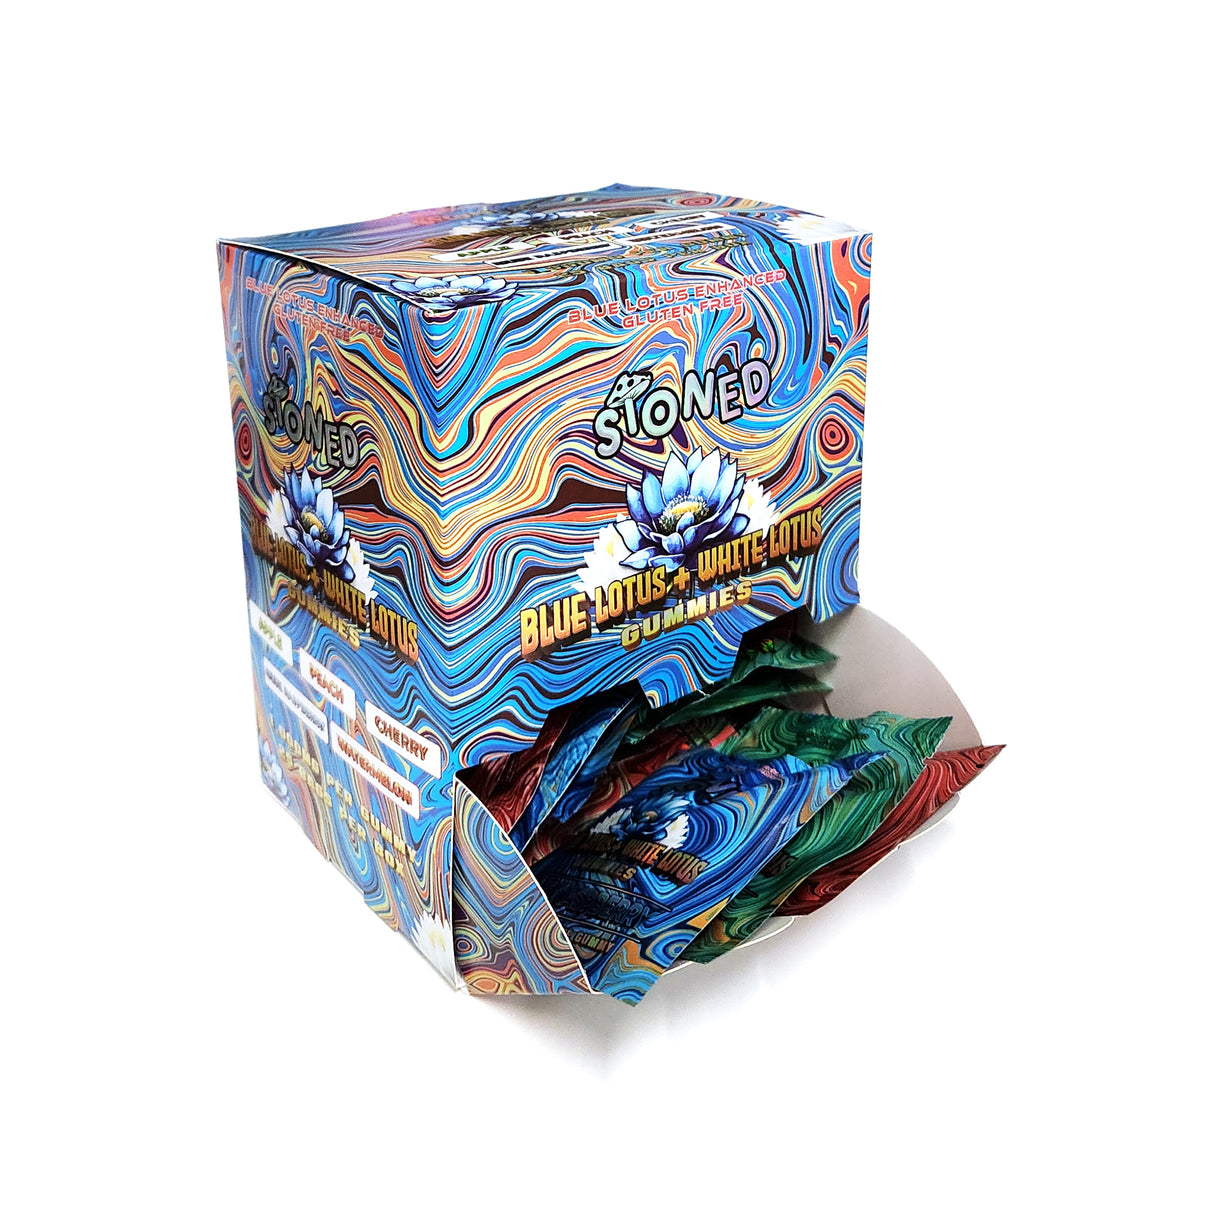 STONED Blue Lotus + White Lotus Single Gummy Mixed Flavors Package 1000mg 25pack/display 25000MG